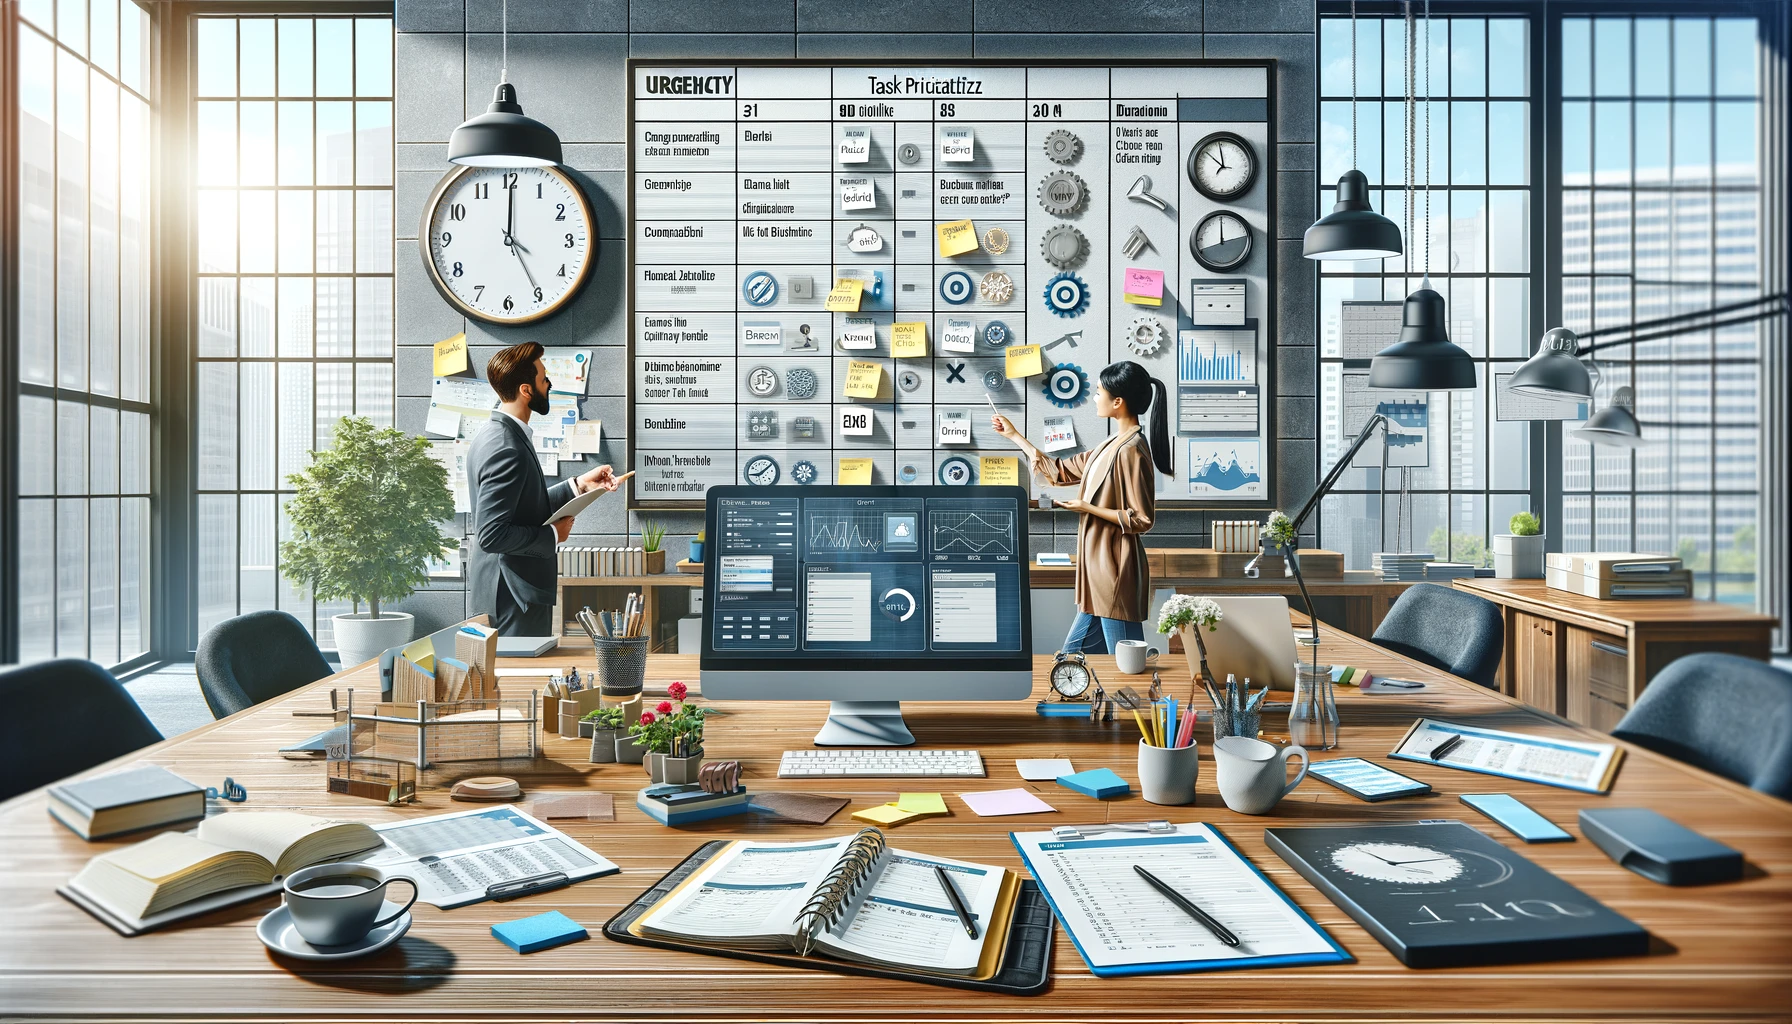 An office scene depicting time management for entrepreneurs focused on productivity strategies. Features a cluttered desk with a laptop displaying a to-do list, sticky notes, and a digital calendar with deadlines. A whiteboard lists tasks by urgency, and a wall clock indicates the time, symbolizing entrepreneur efficiency. Two people, a man and a woman, actively discuss and organize their tasks, embodying collaboration and effective time management in a sunny, well-organized workspace.